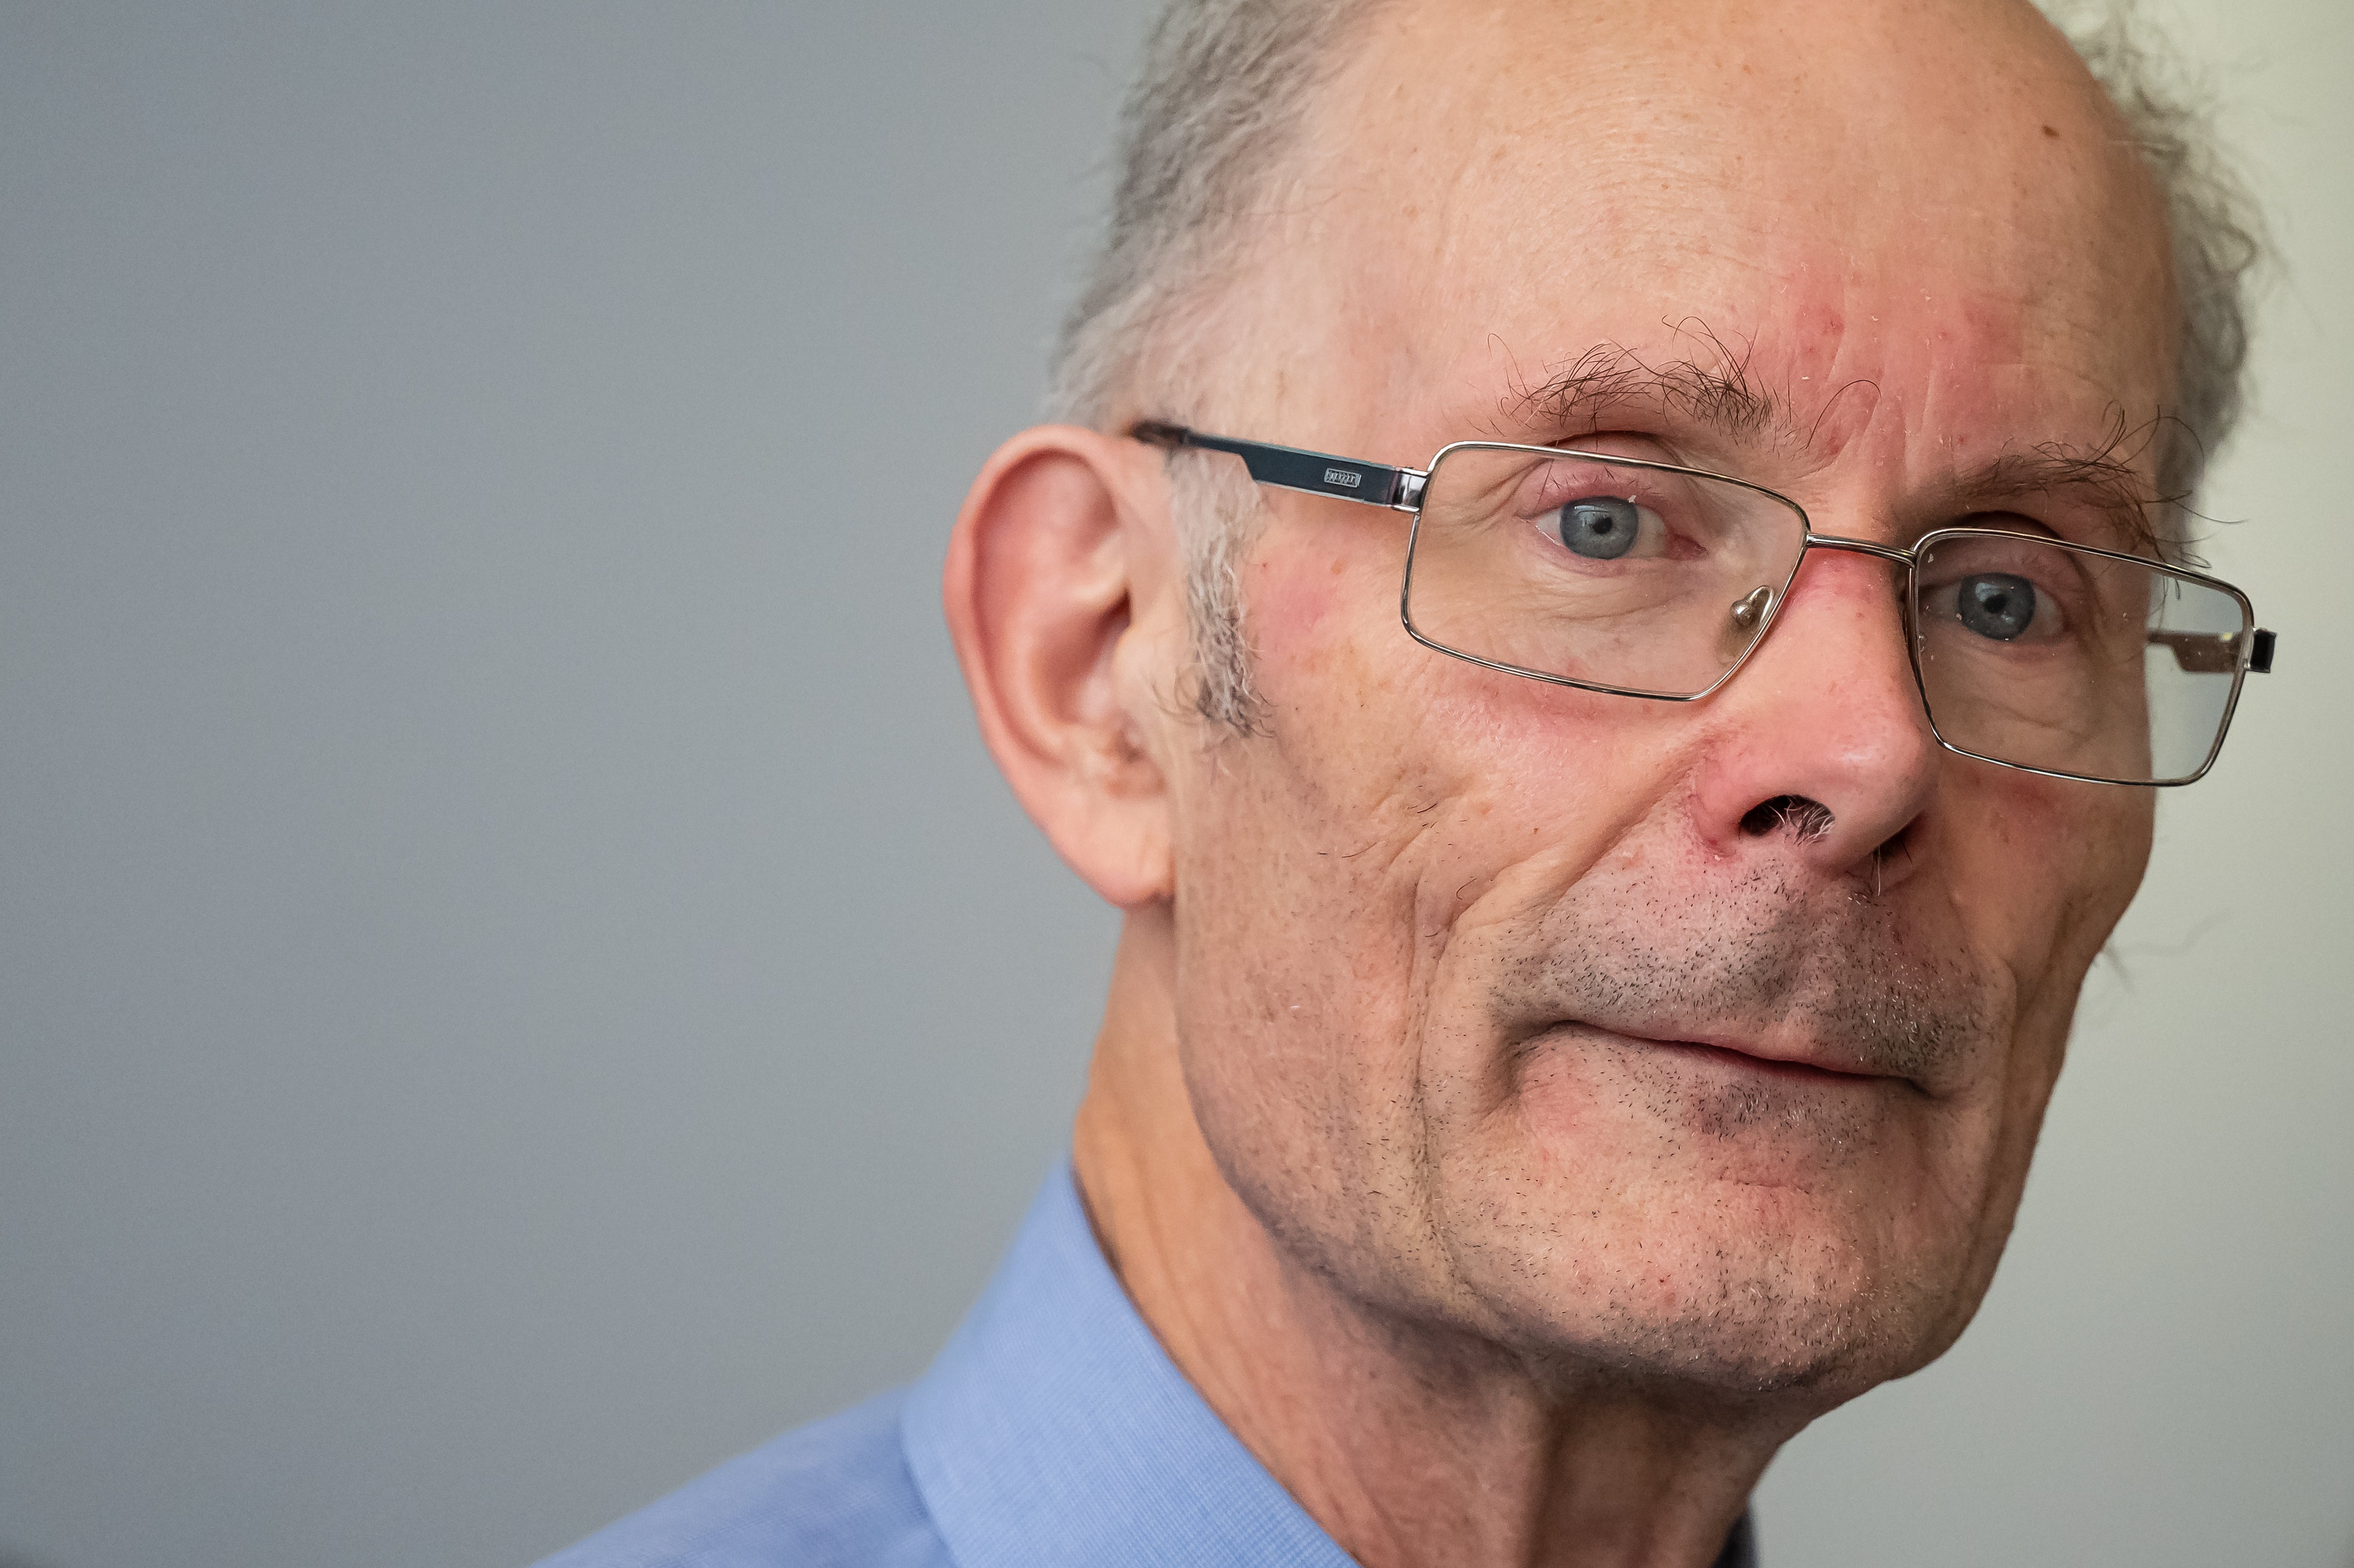 John Curtice does not believe that fighting culture-war issues is a winning strategy